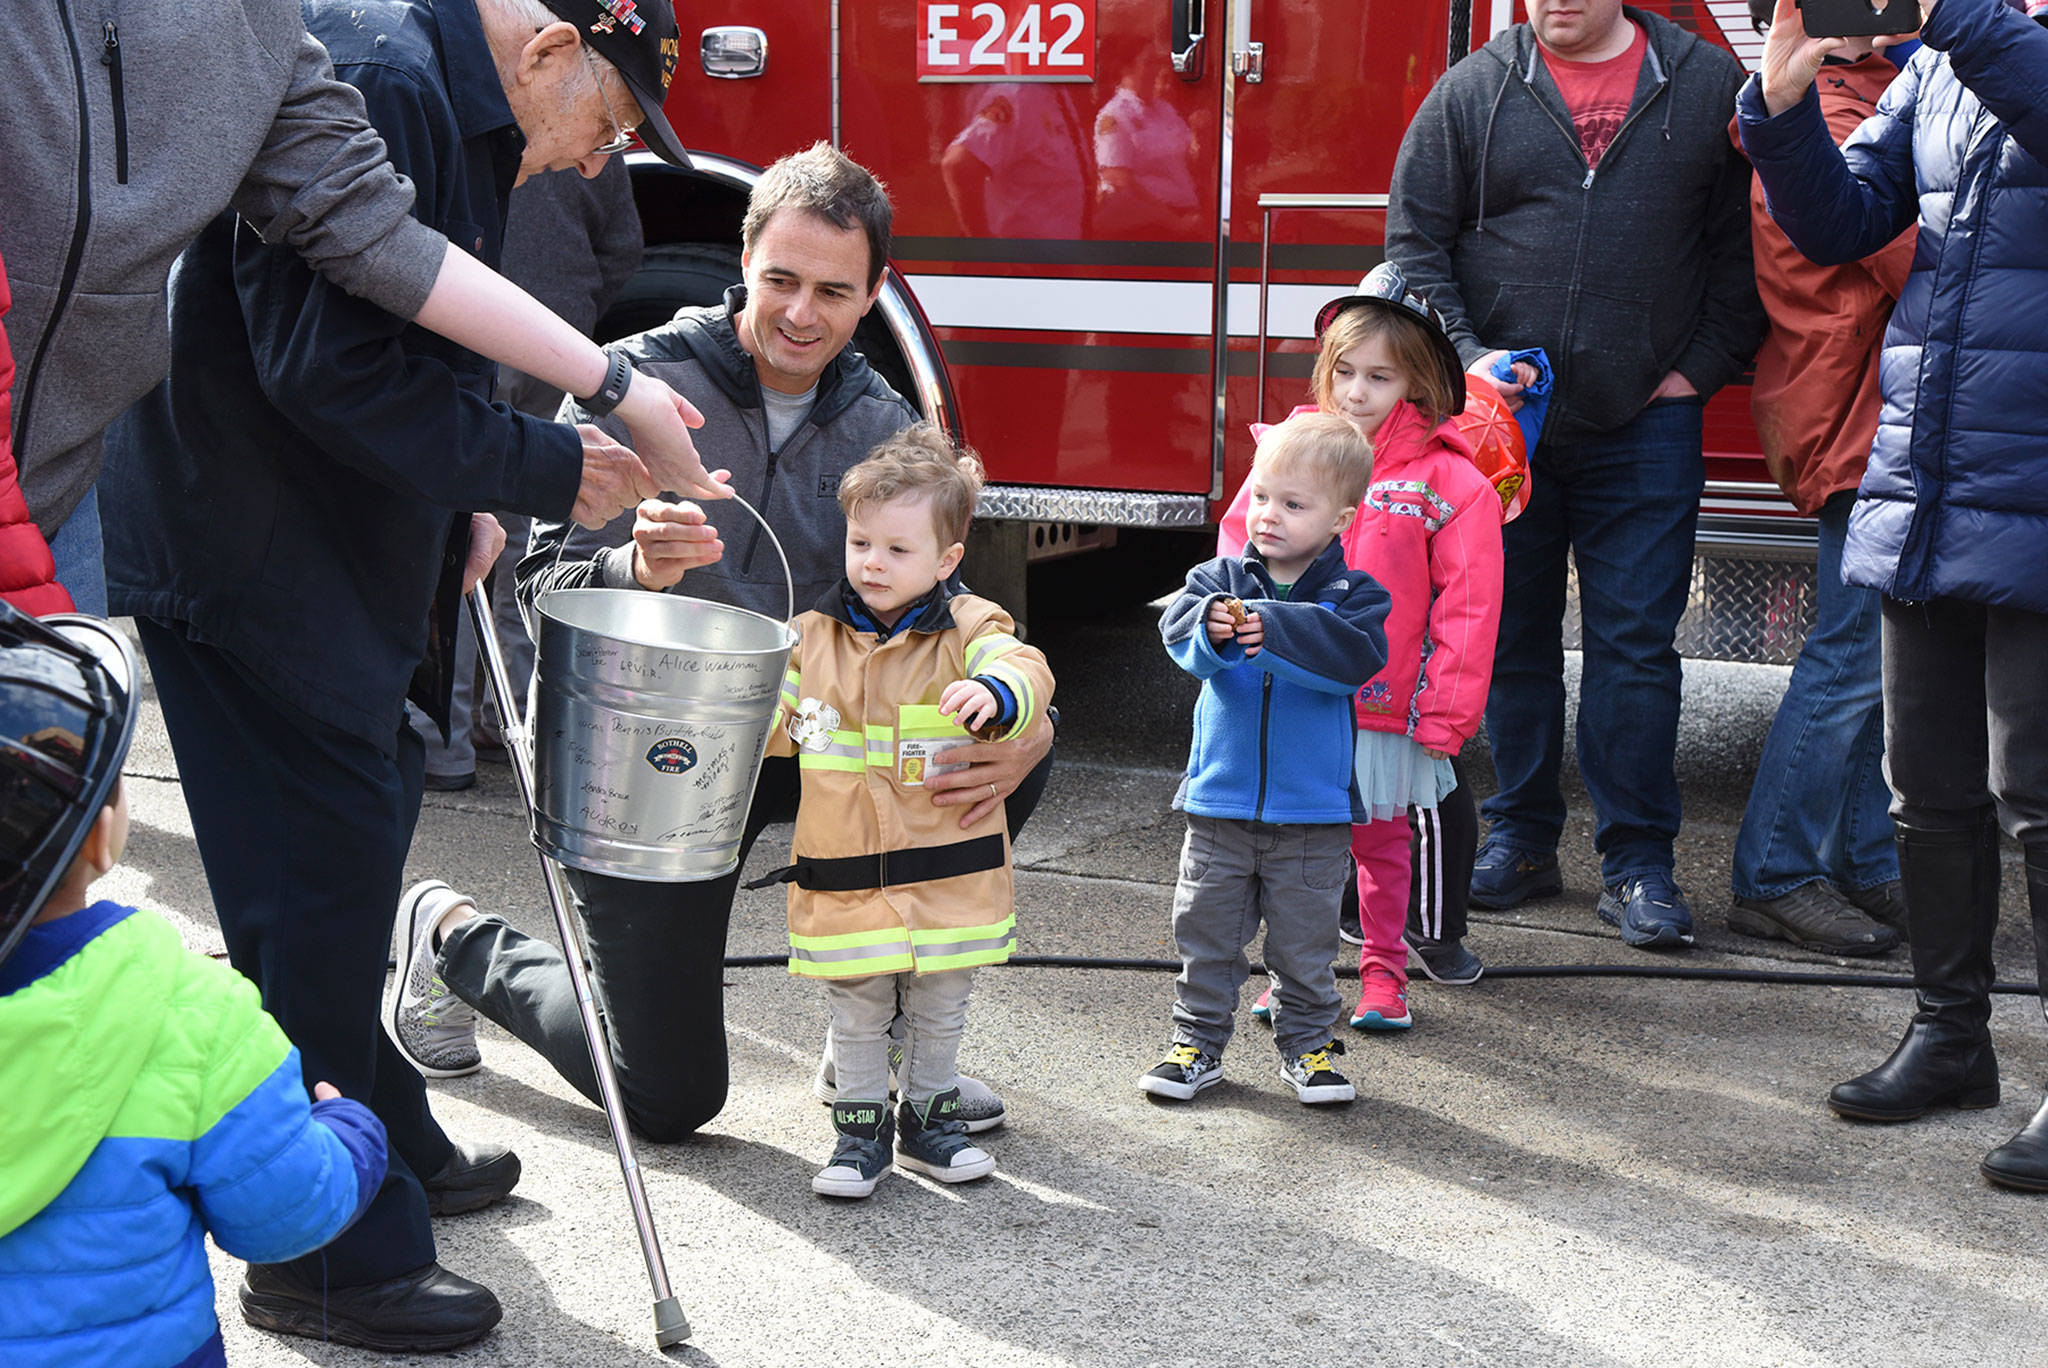 Young Bothell community members participate in a “bucket brigade.” Photo courtesy of Kirsten Clemens